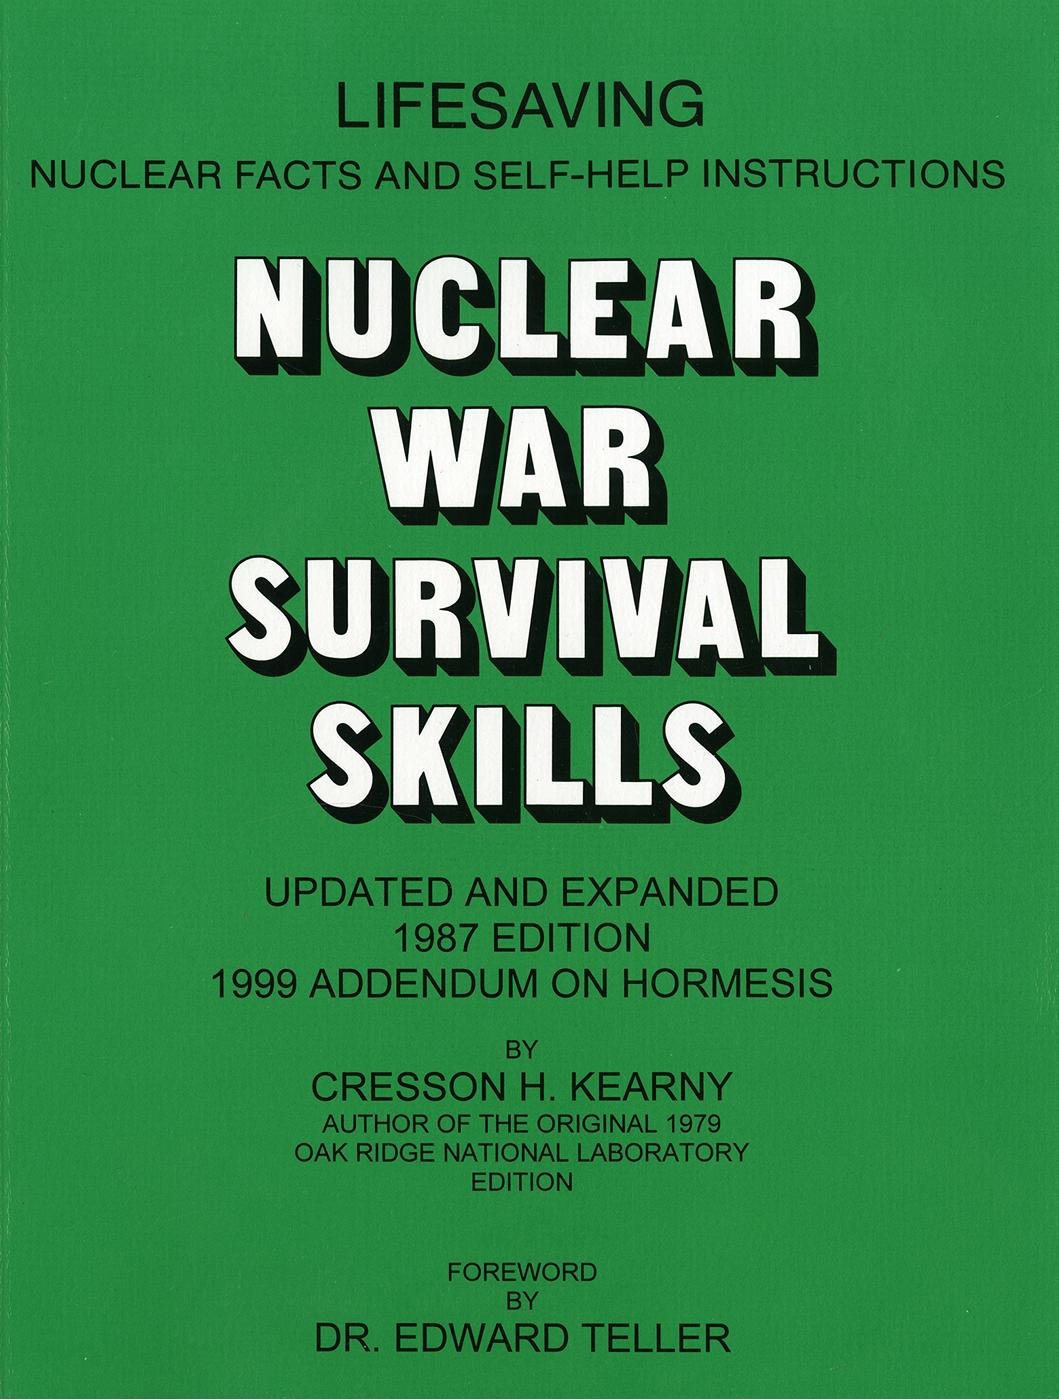 Nuclear War Survival Skills by Cresson H. Kearny 